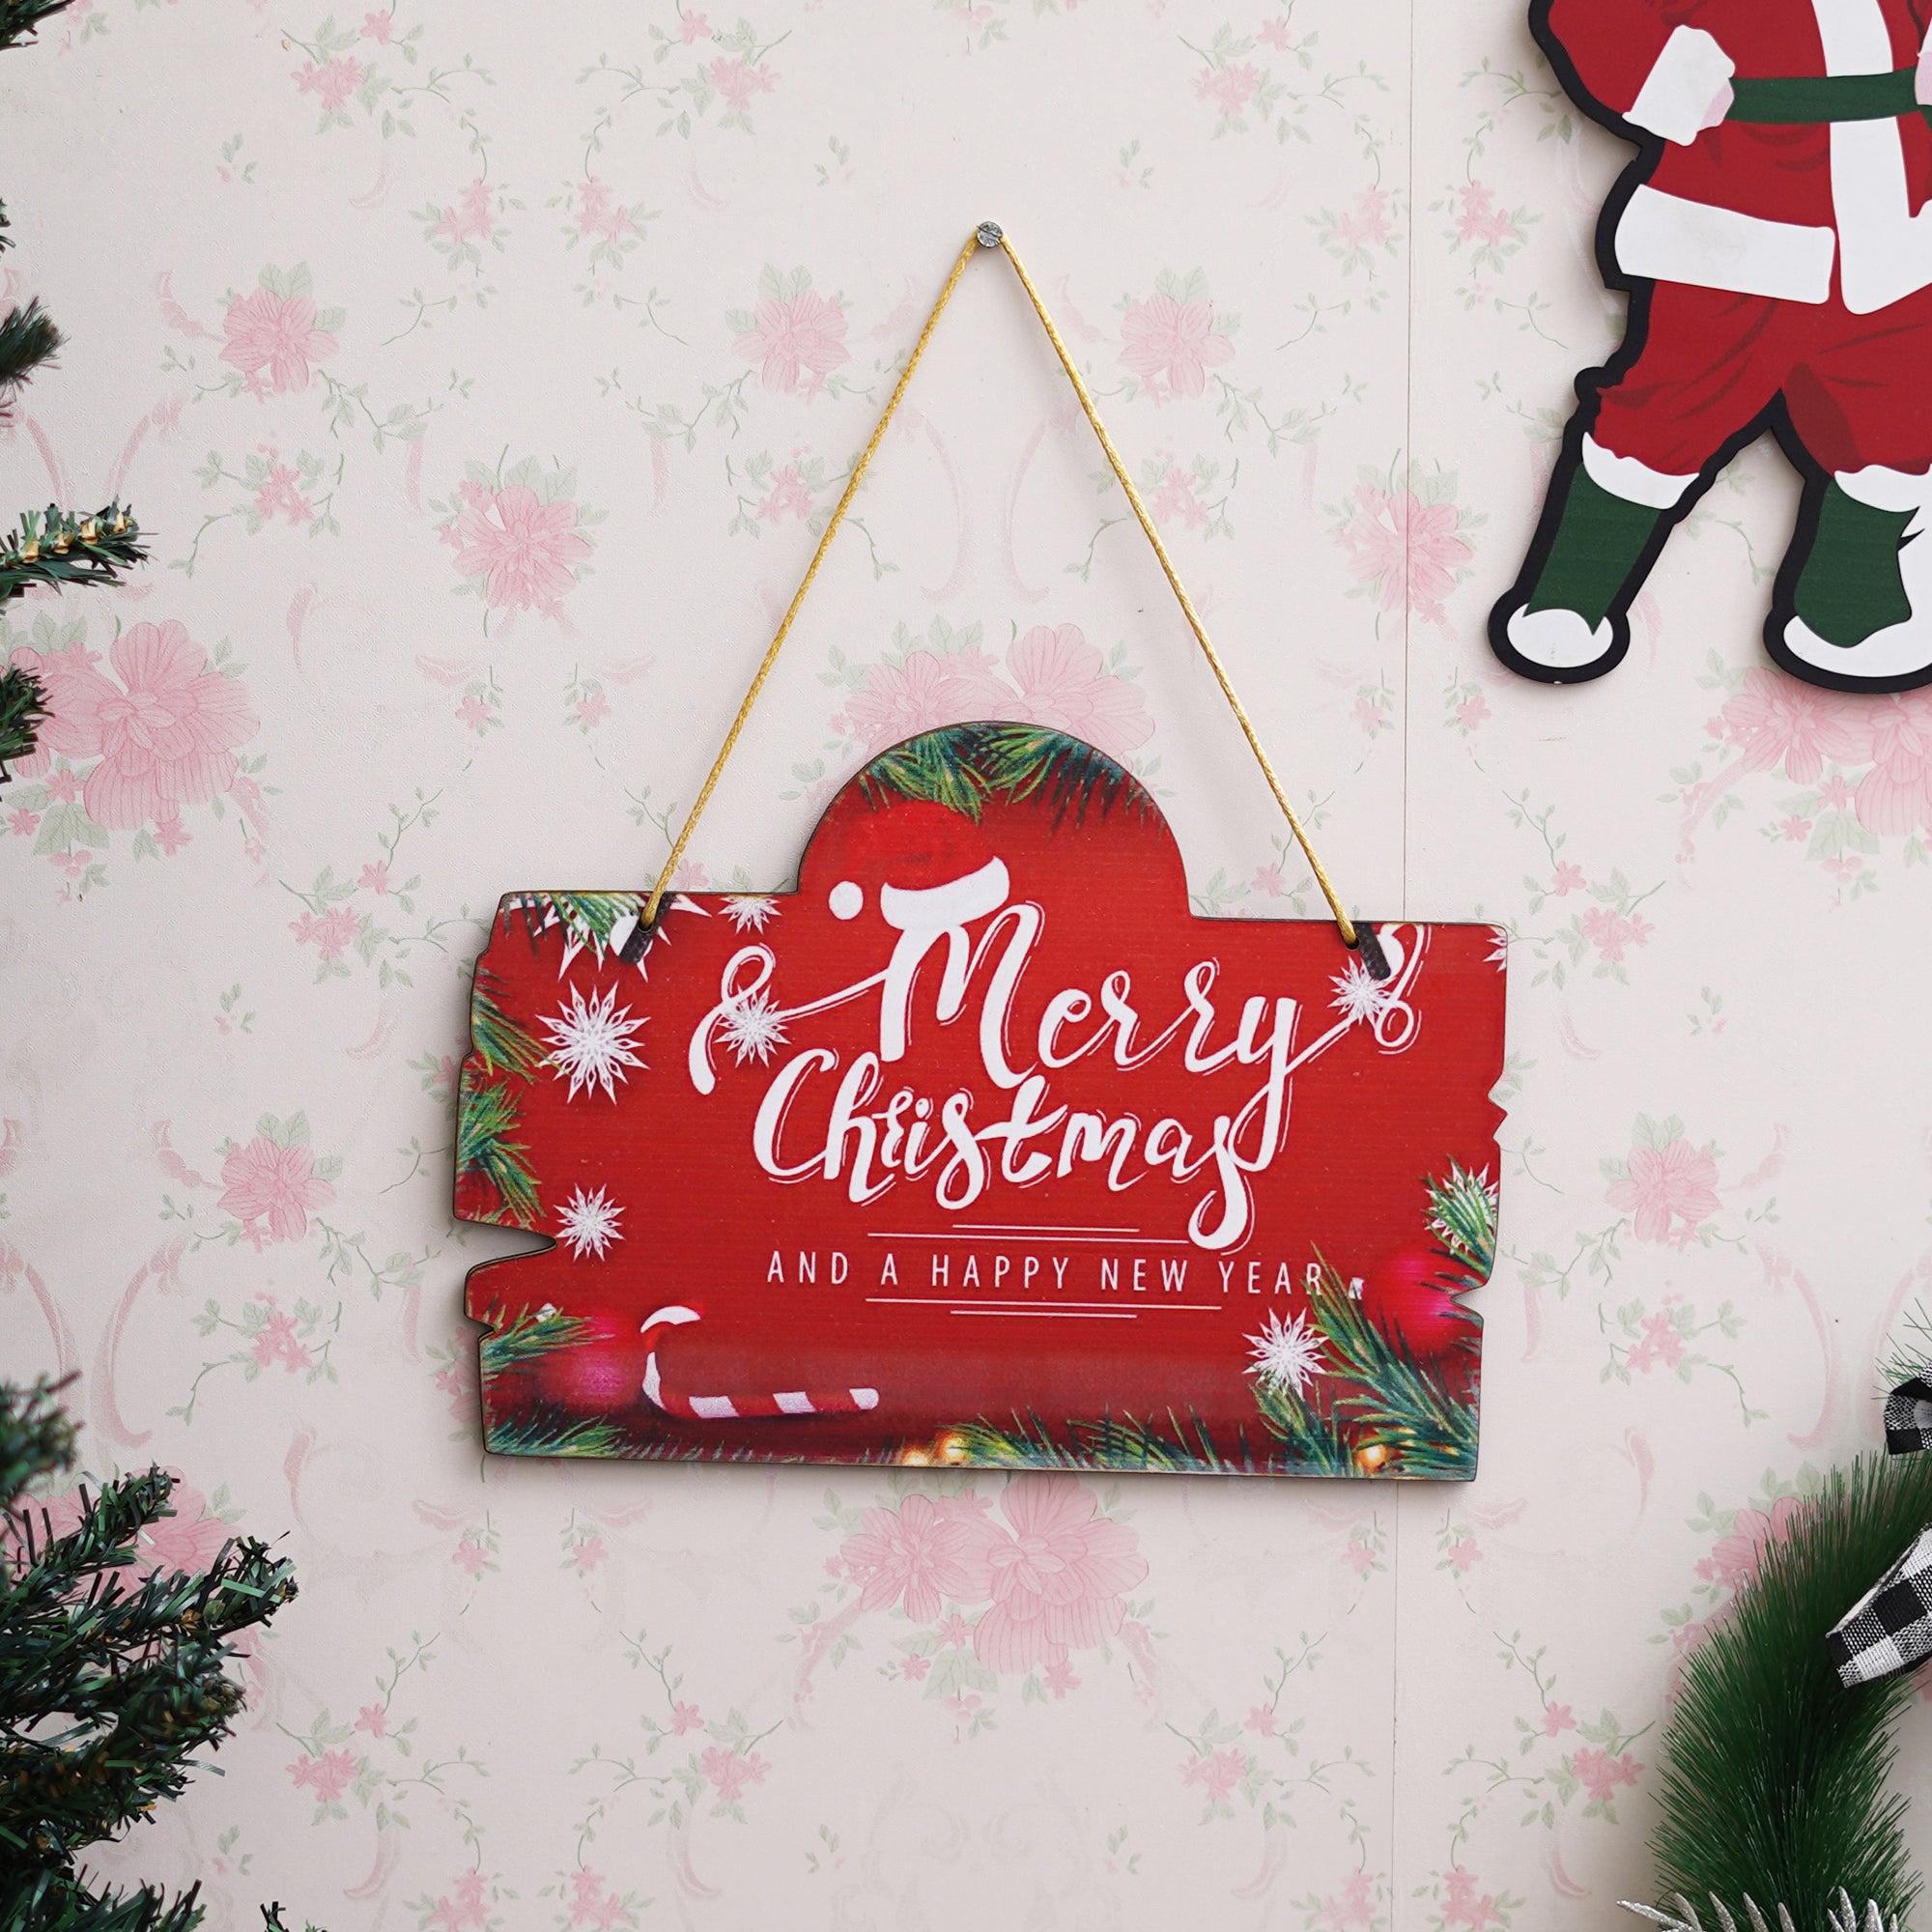 eCraftIndia "Merry Christmas and Happy New Year" Printed Door Wall Hanging for Home and Christmas Tree Decorations (Red, Green, White) 1